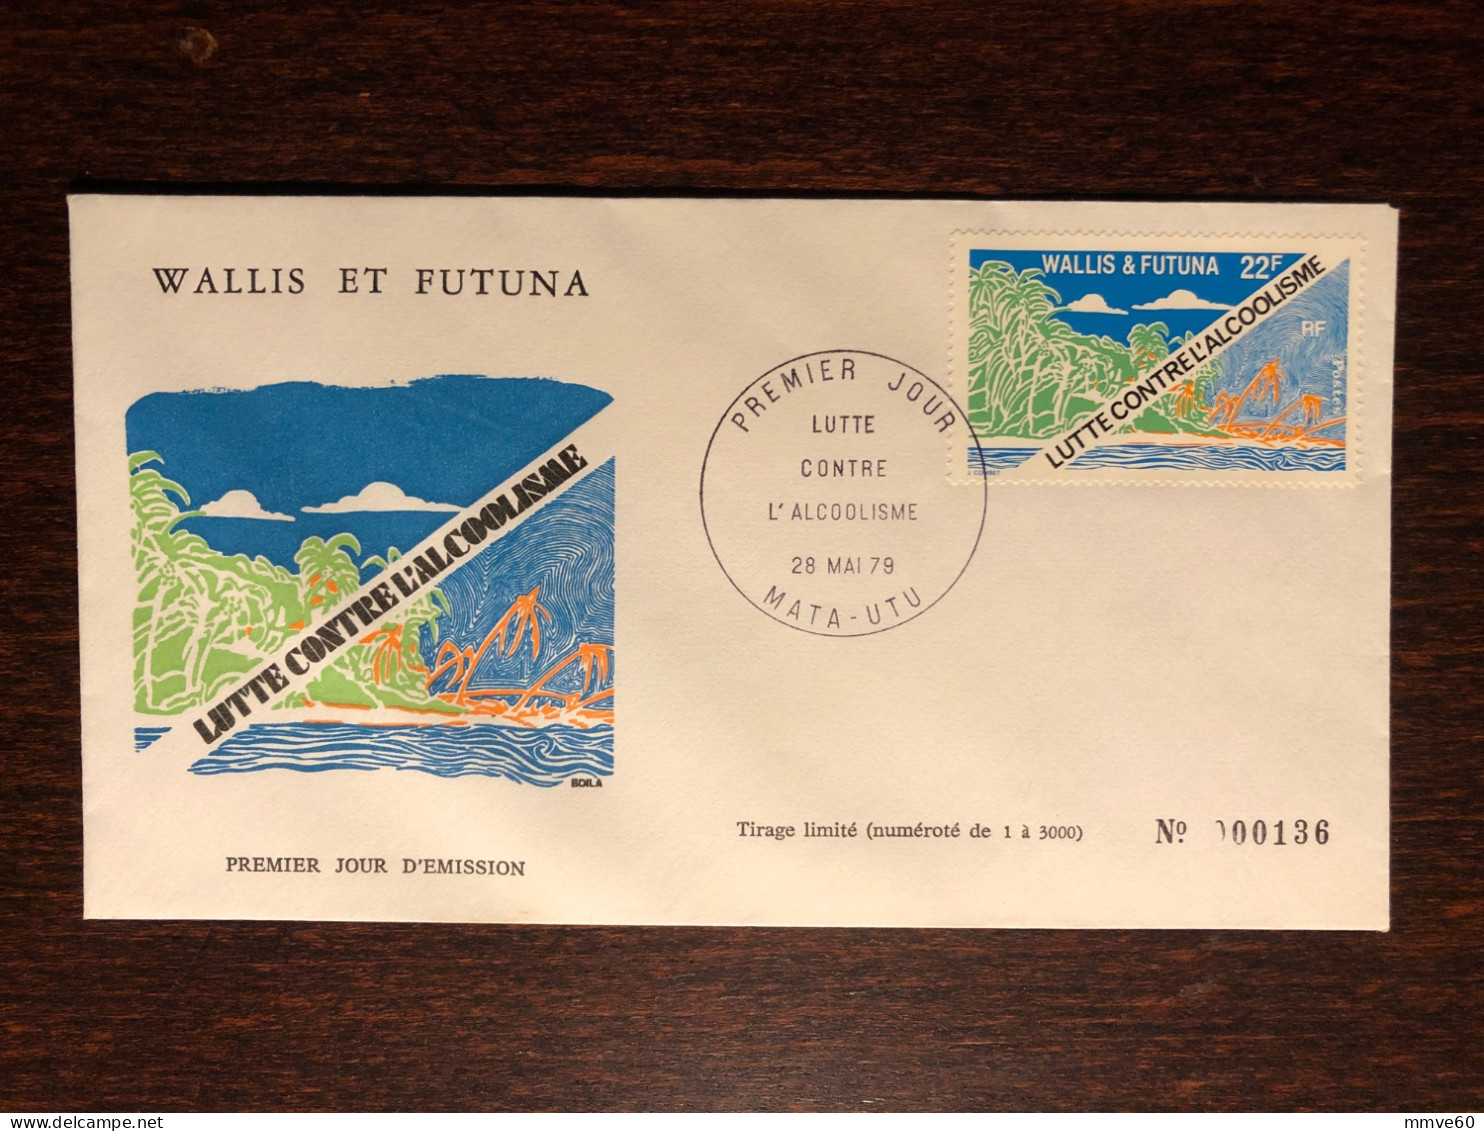 WALLIS & FUTUNA FDC COVER 1979 YEAR ALCOHOLISM HEALTH MEDICINE STAMPS - Lettres & Documents